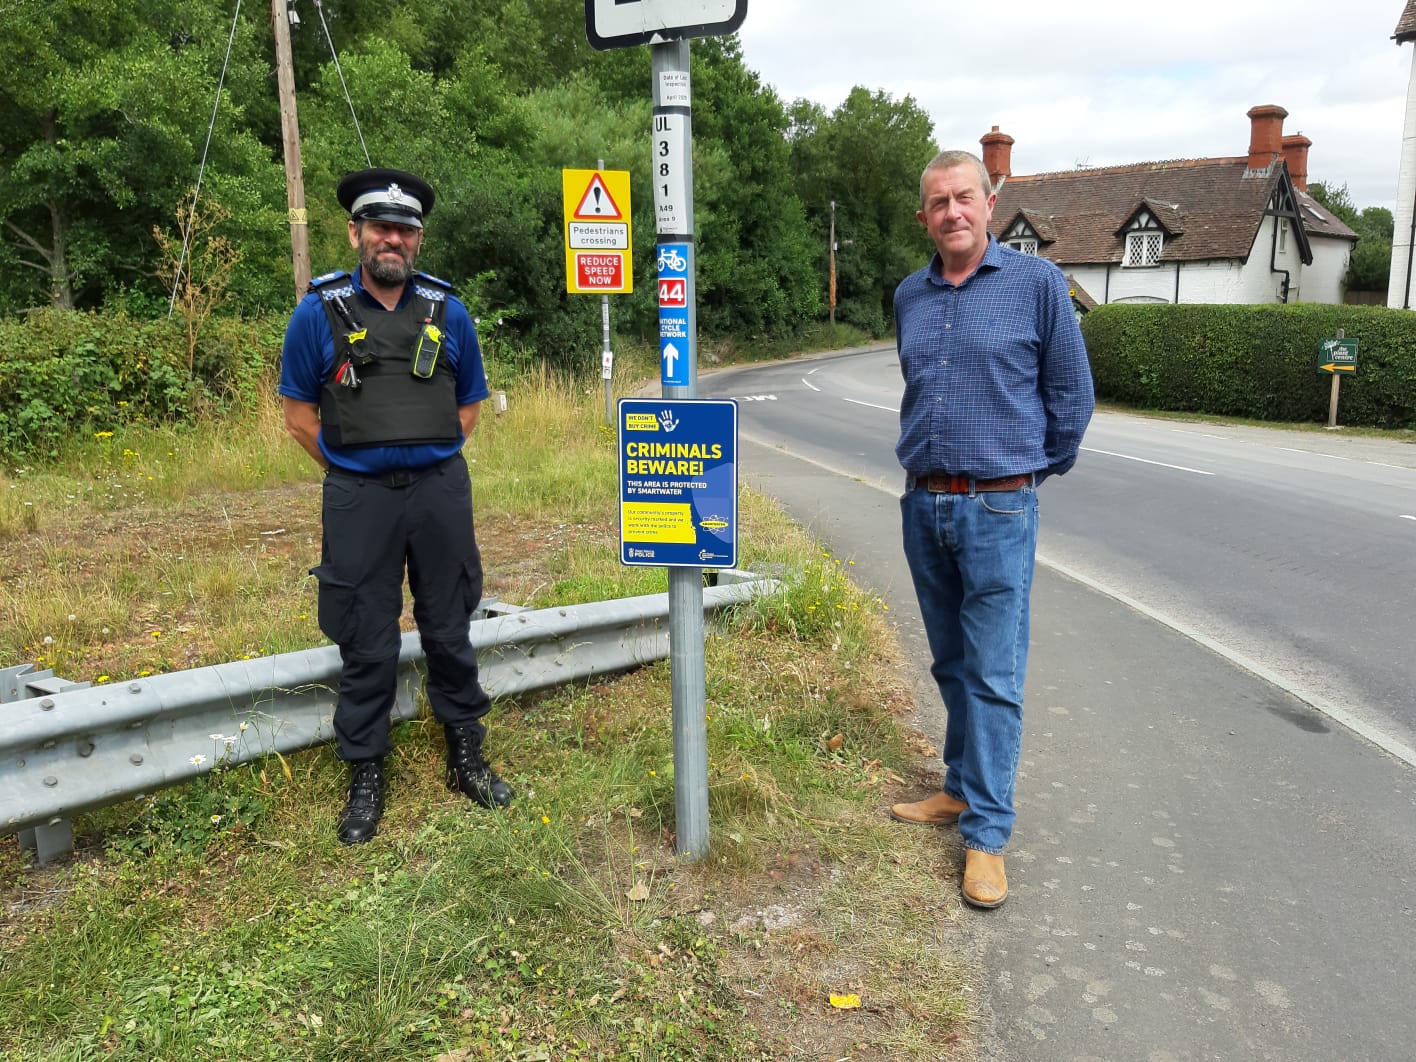 PCSO Dave Baron with PC Clive Leworthy placing Smartwater signs around the Parish to deter criminals.